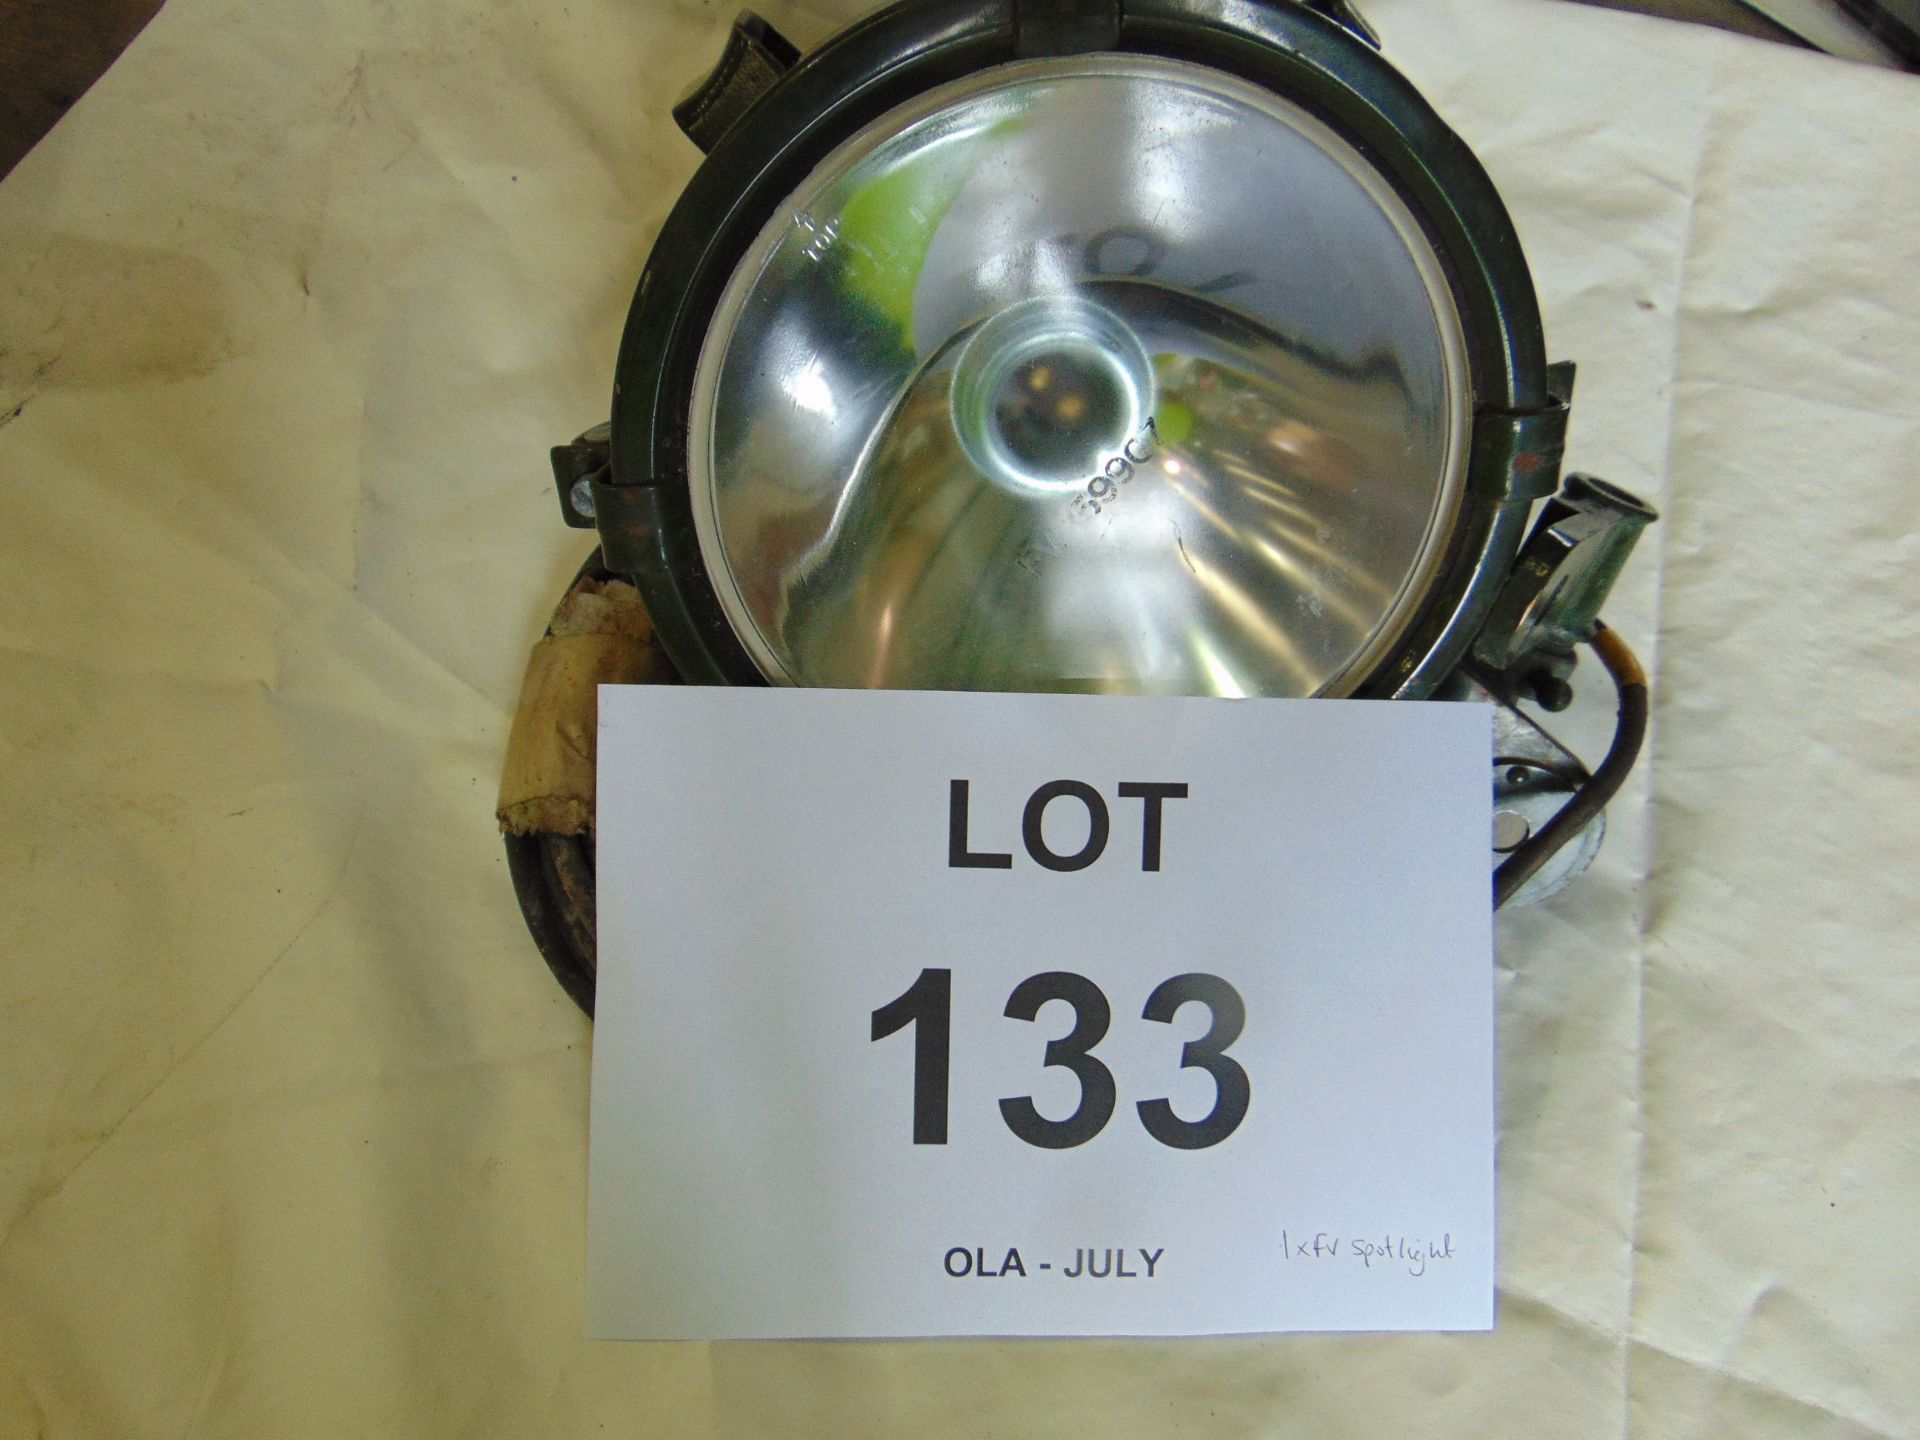 UNUSED FV ISSUED SEARCHLIGHT A1 CONDITION C/W BRACKET, LEAD AND PLUG